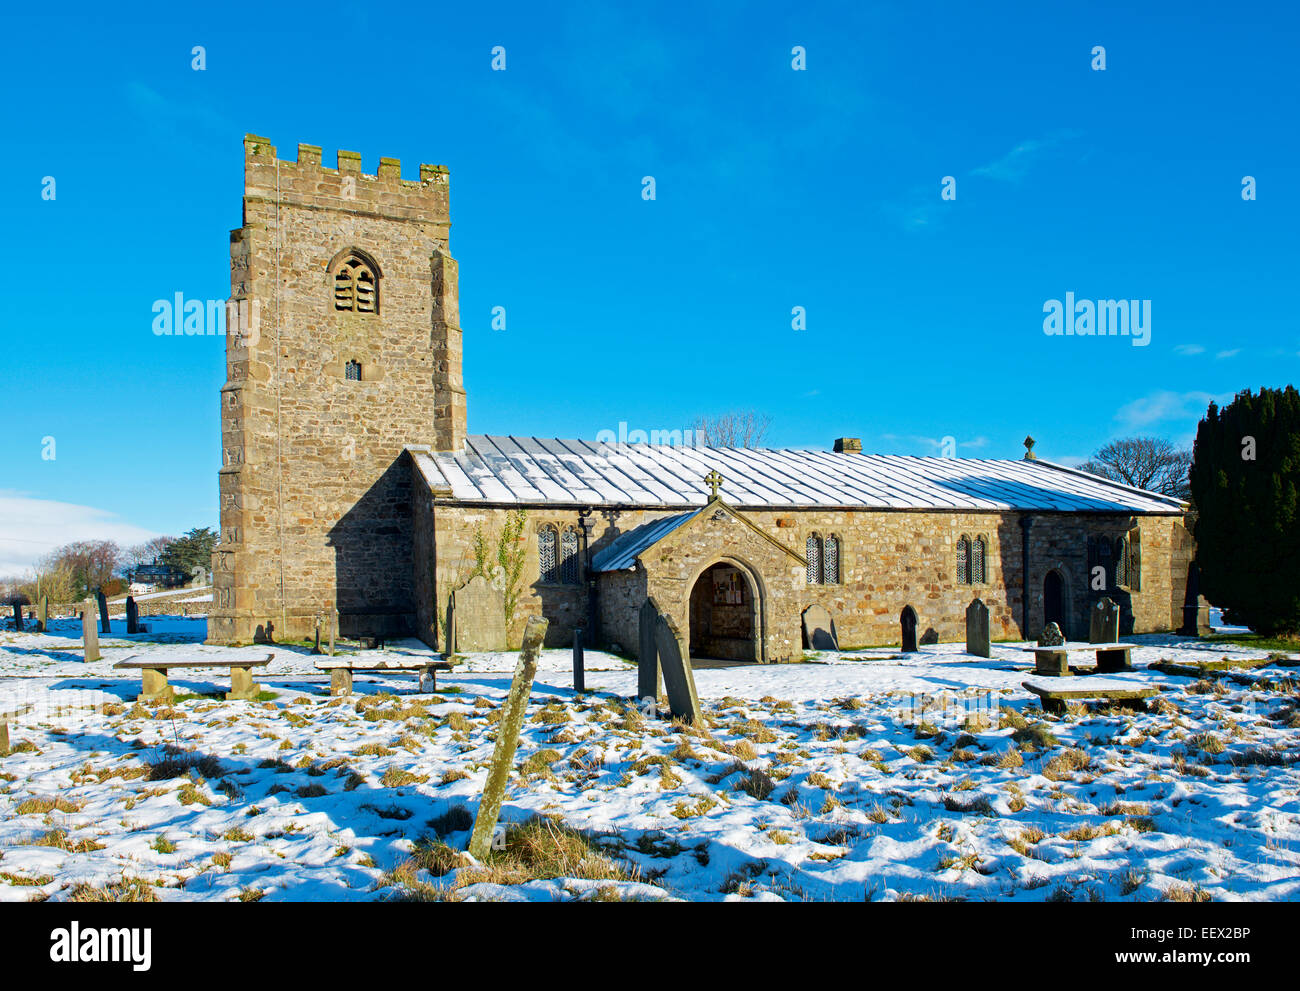 St Oswald's Church, Horton in Ribblesdale, Yorkshire Dales National Park, North Yorkshire, England UK Stock Photo